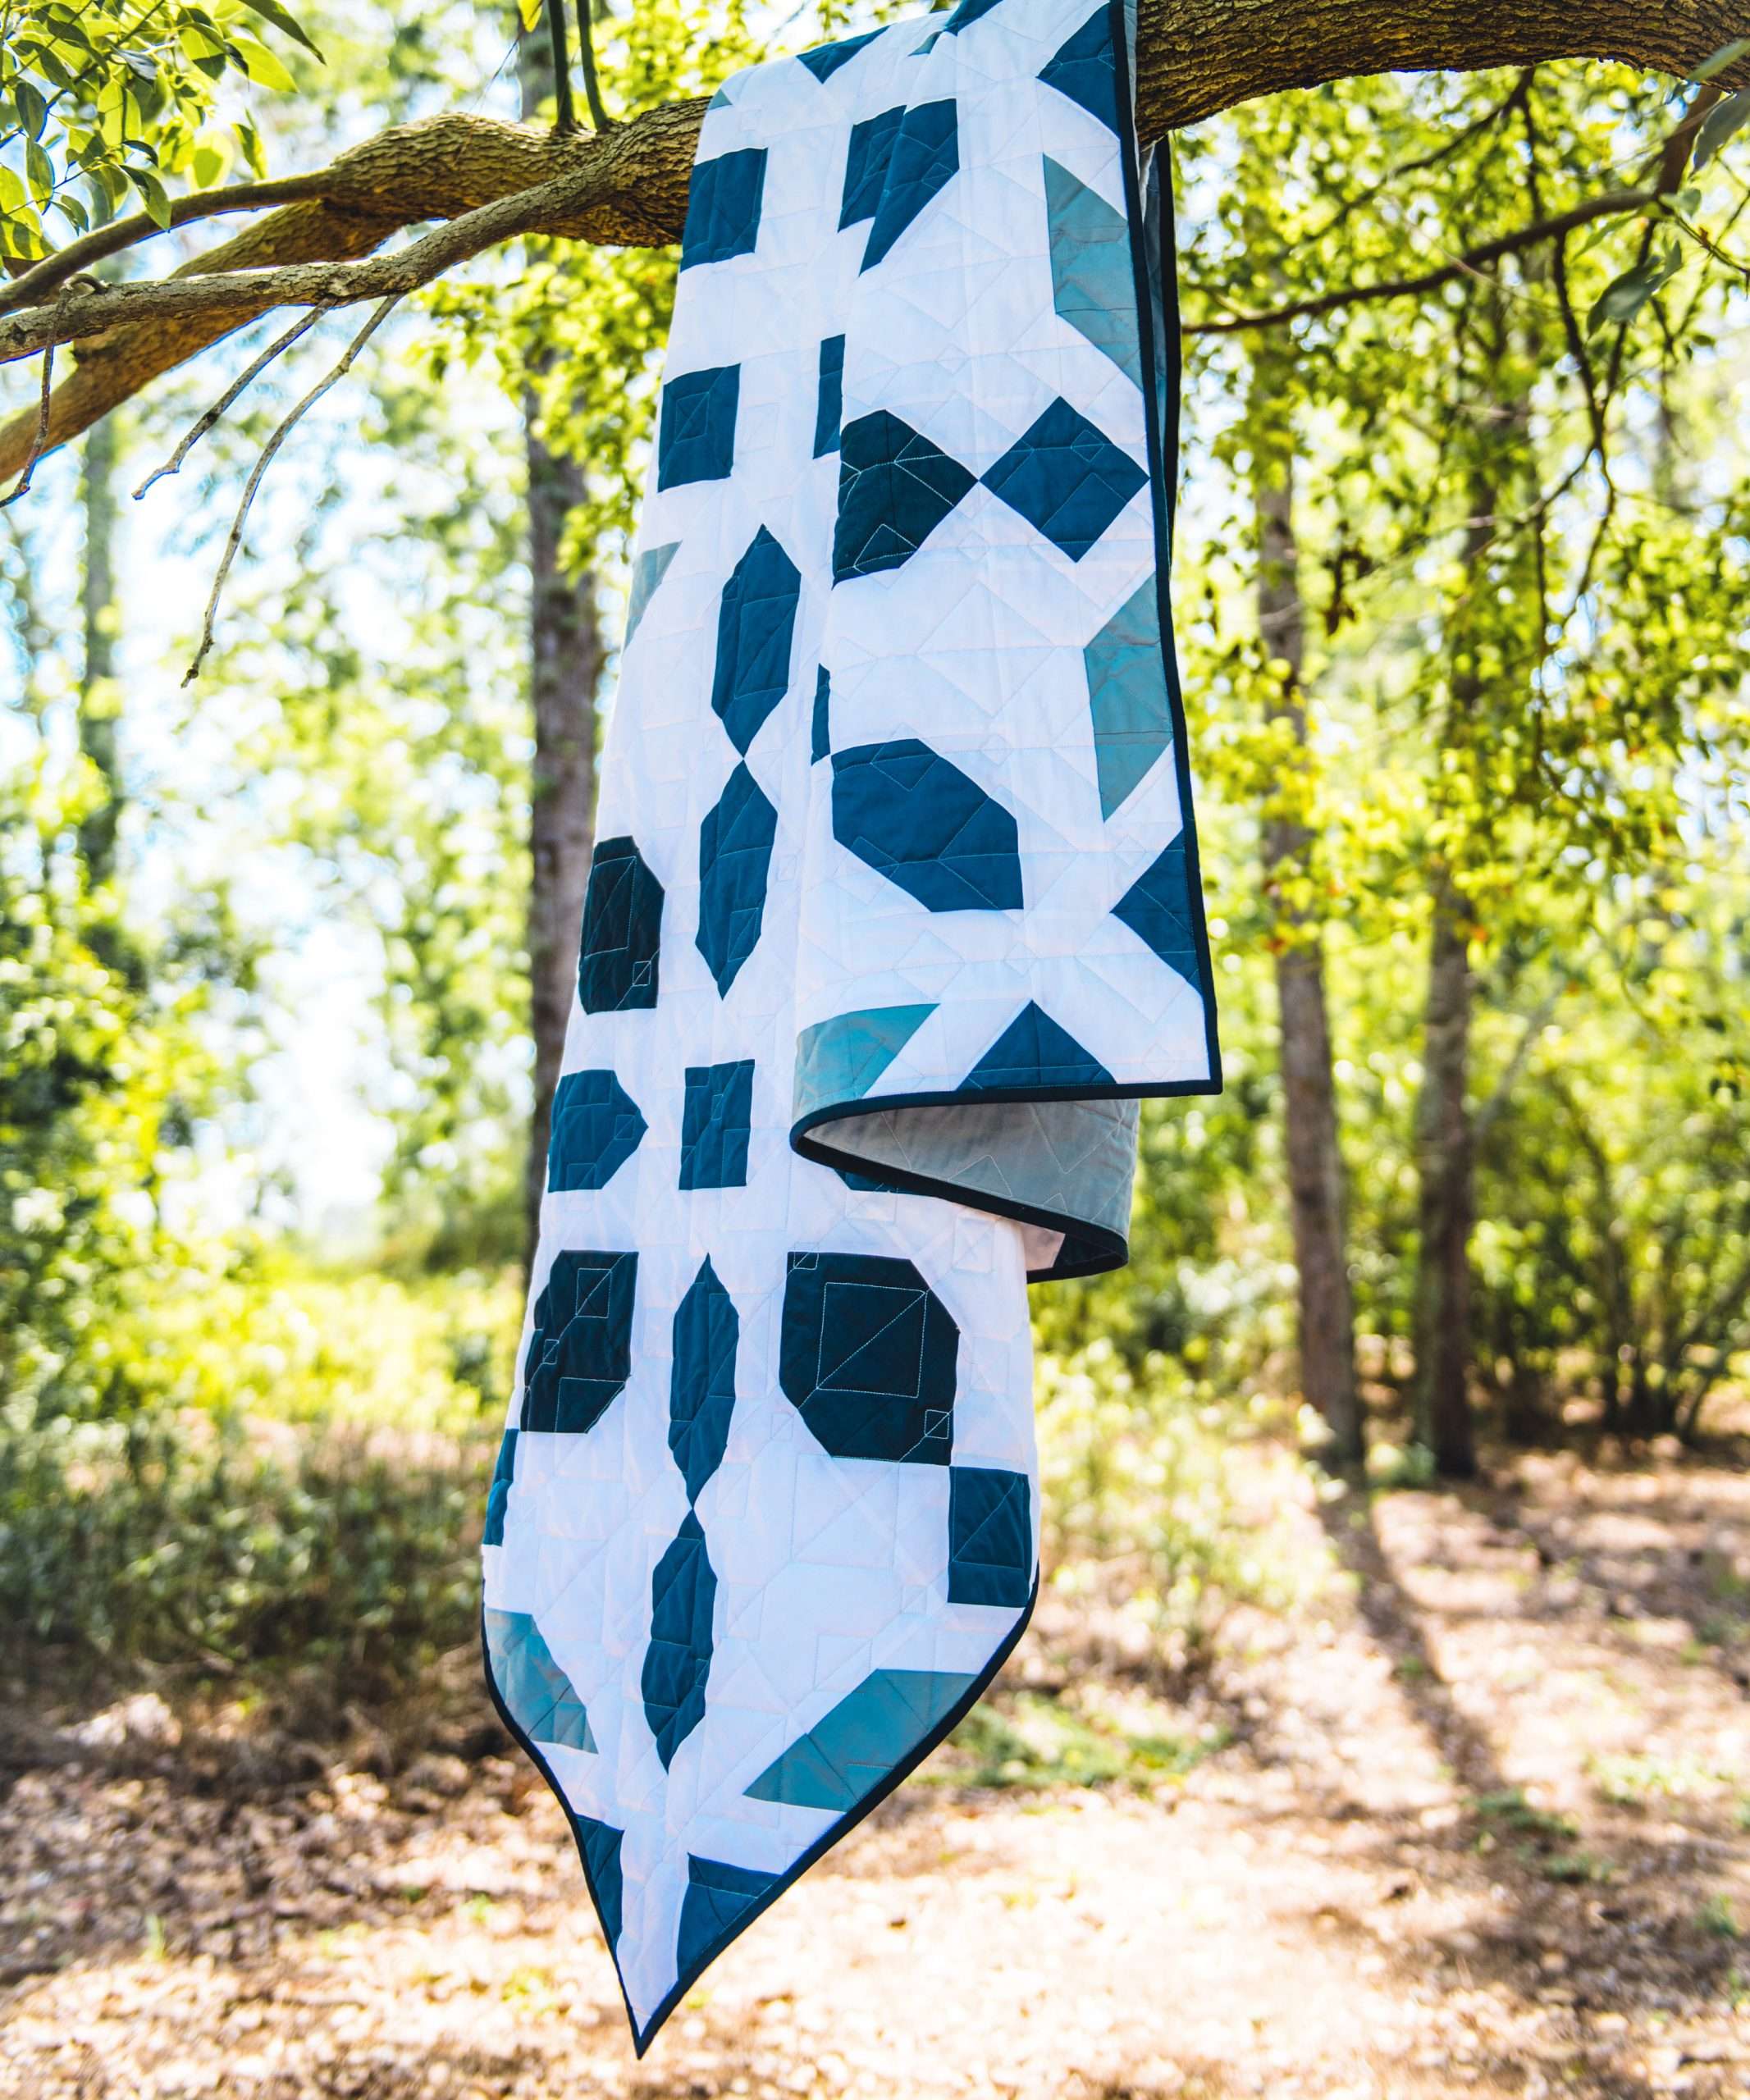 How to Make a Quilt from Start to Finish